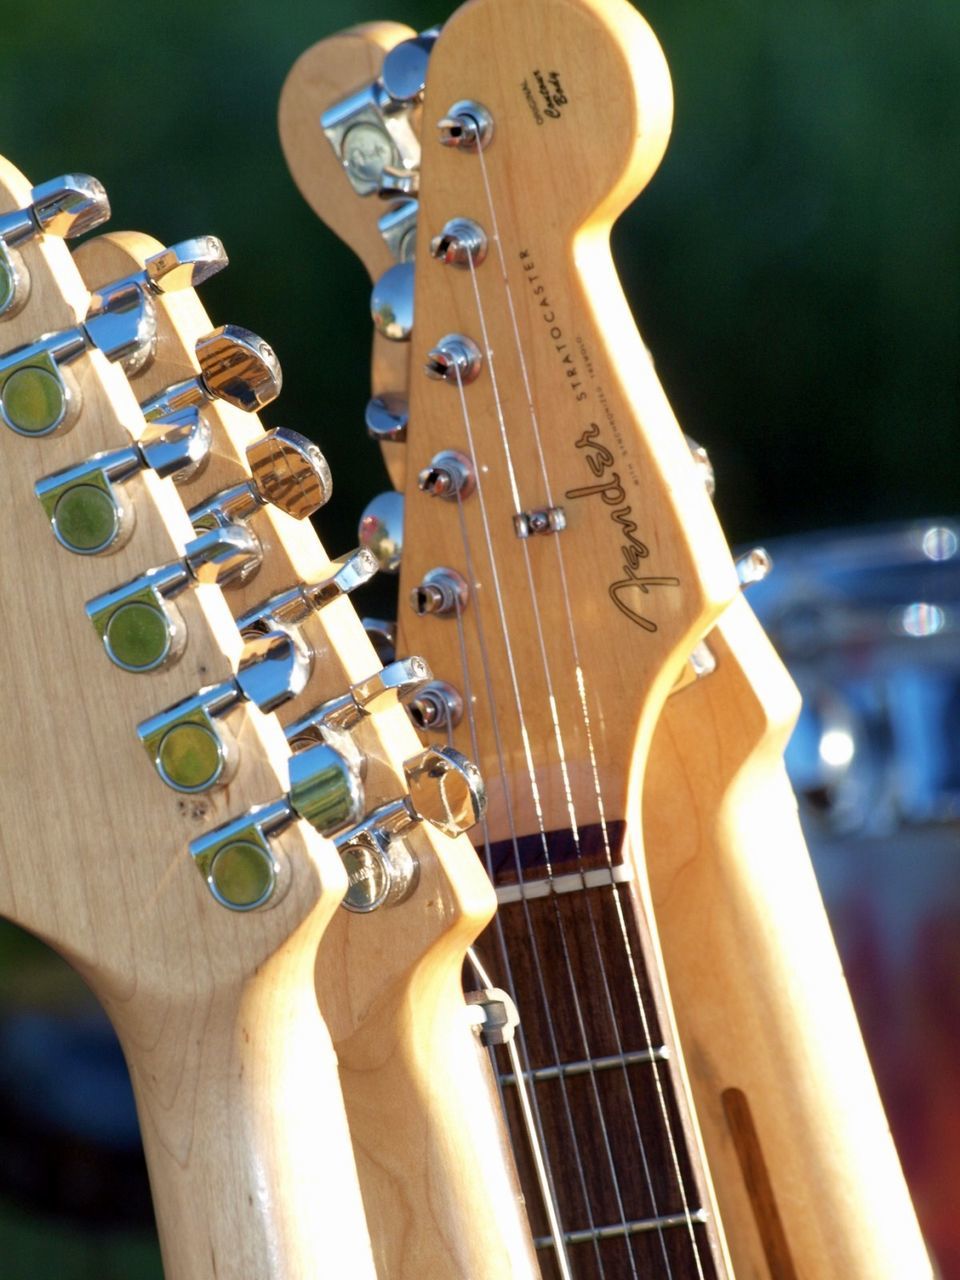 music, musical instrument, musical instrument string, arts culture and entertainment, string instrument, guitar, focus on foreground, close-up, wood - material, no people, playing, woodwind instrument, fretboard, electric guitar, outdoors, day, classical music